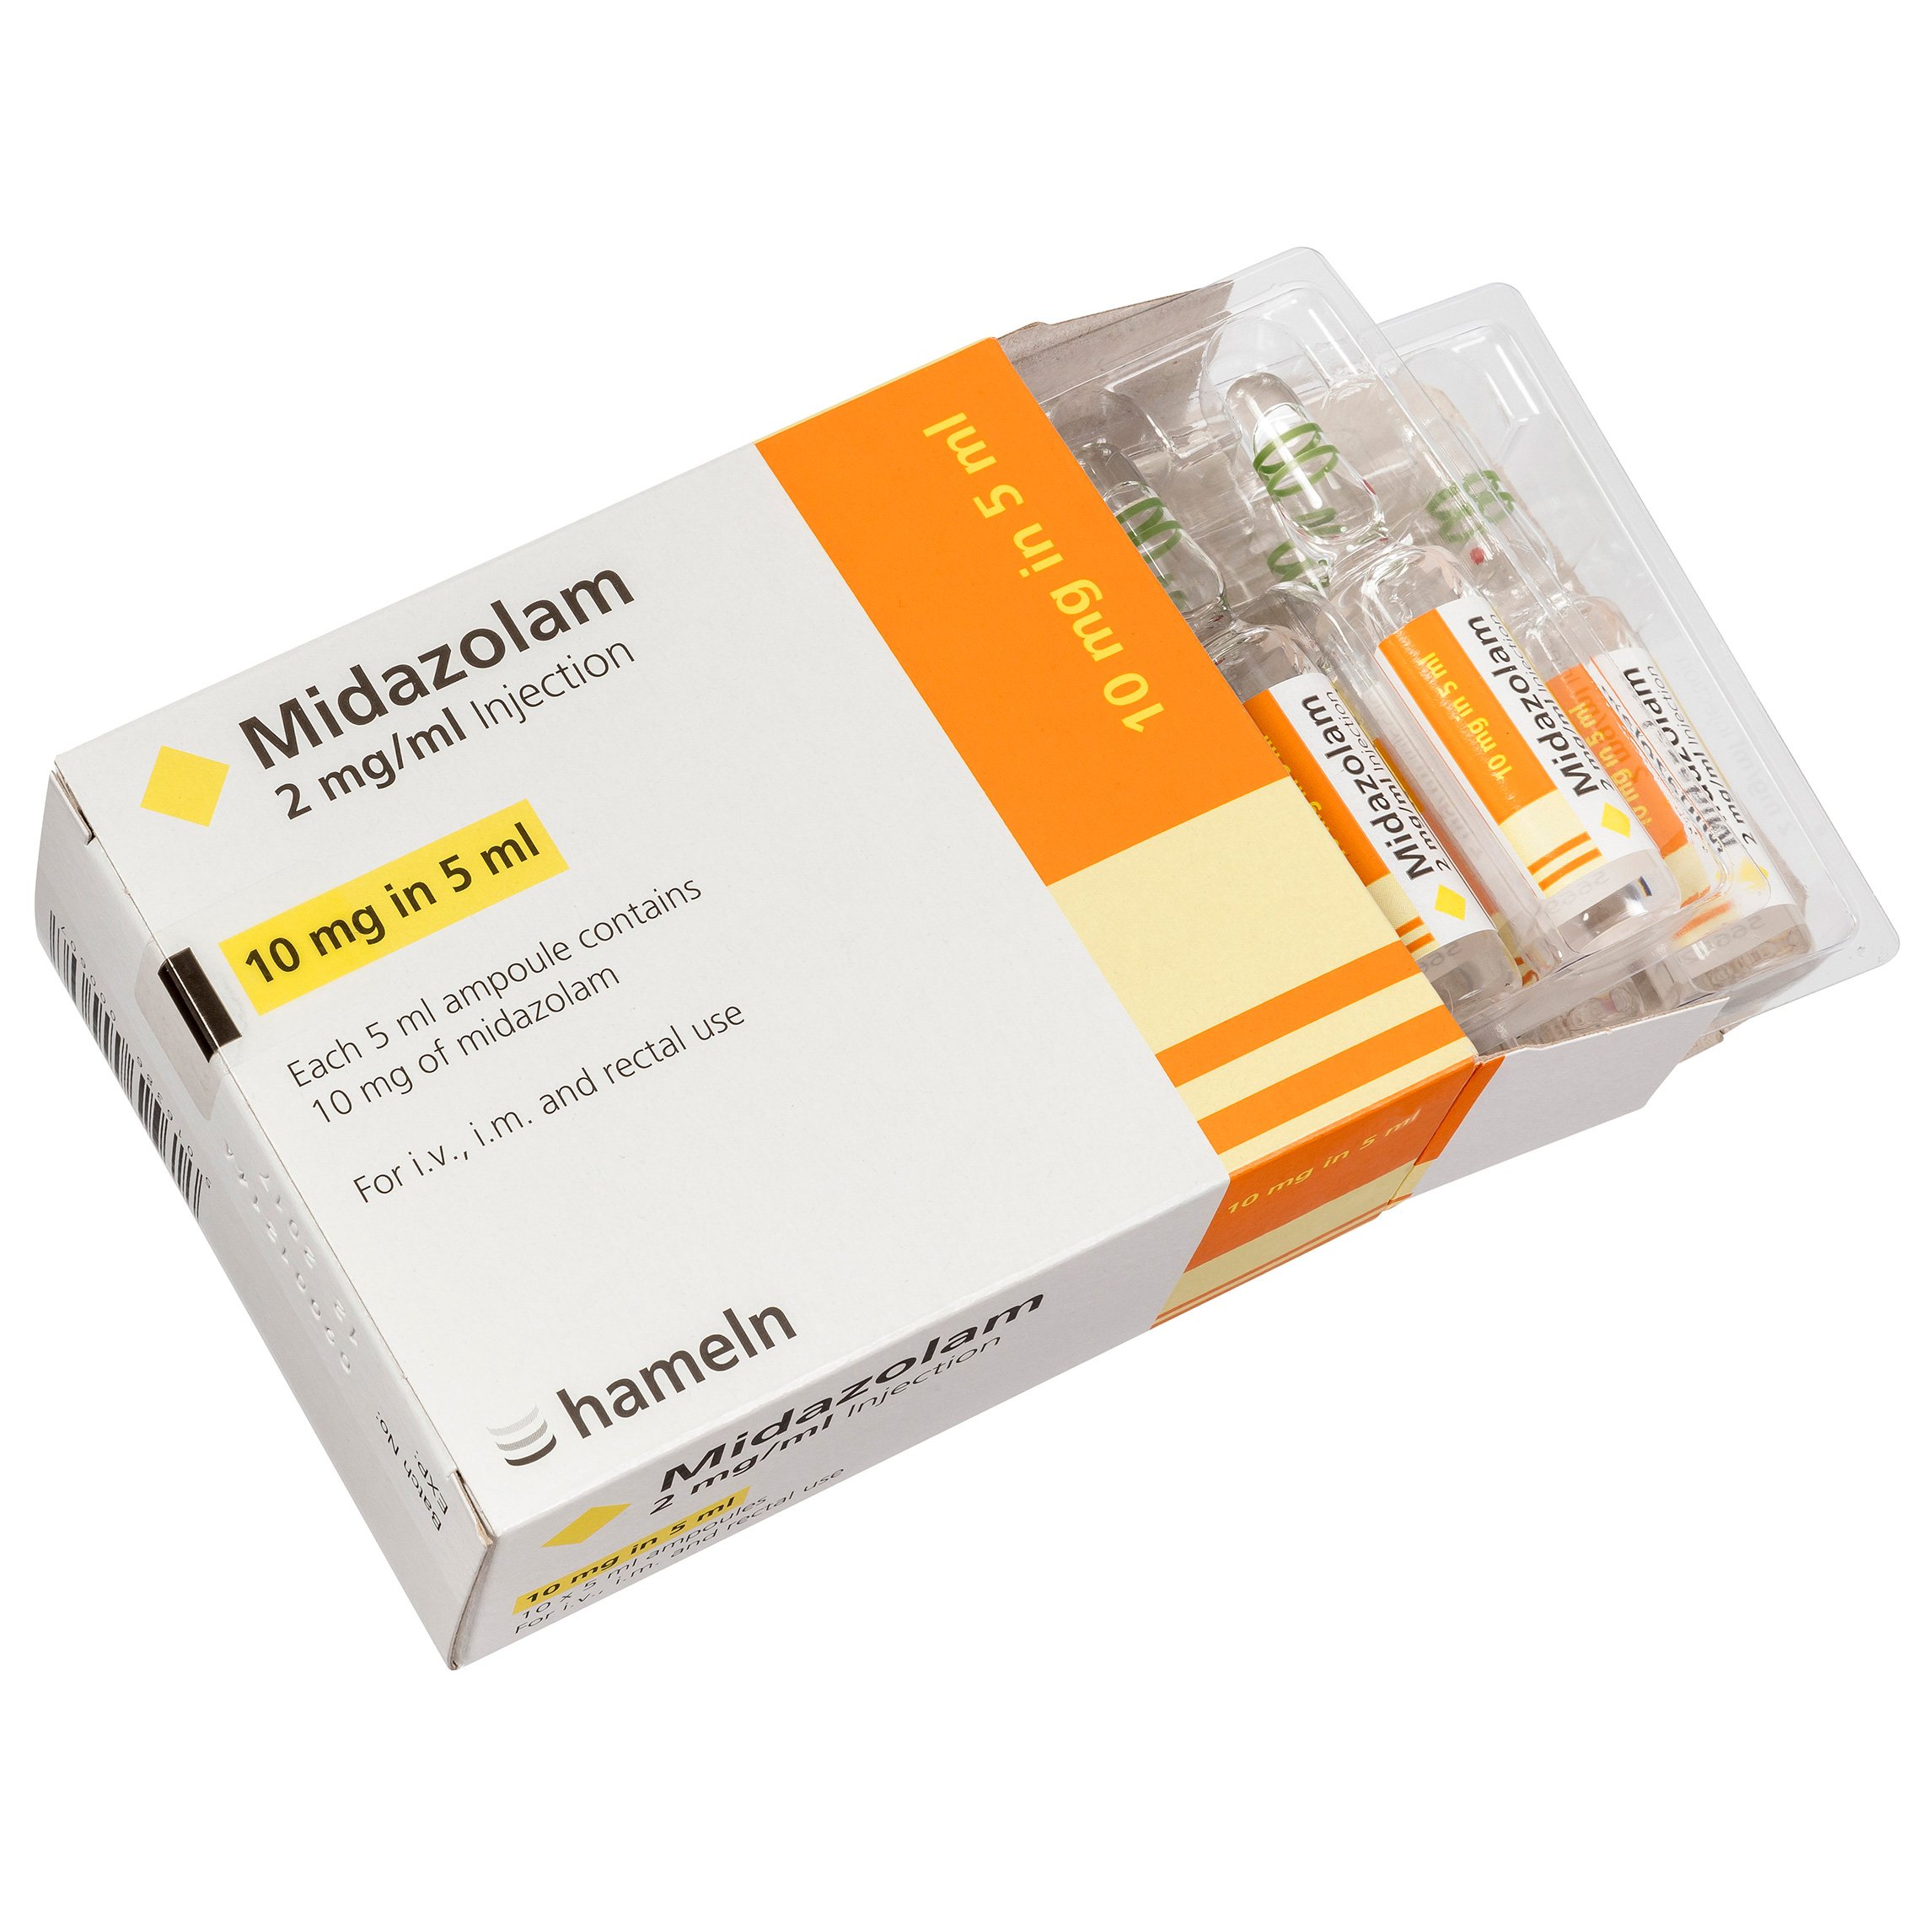 Midazolam 2mg/ml solution for injection, 5ml ampoules 